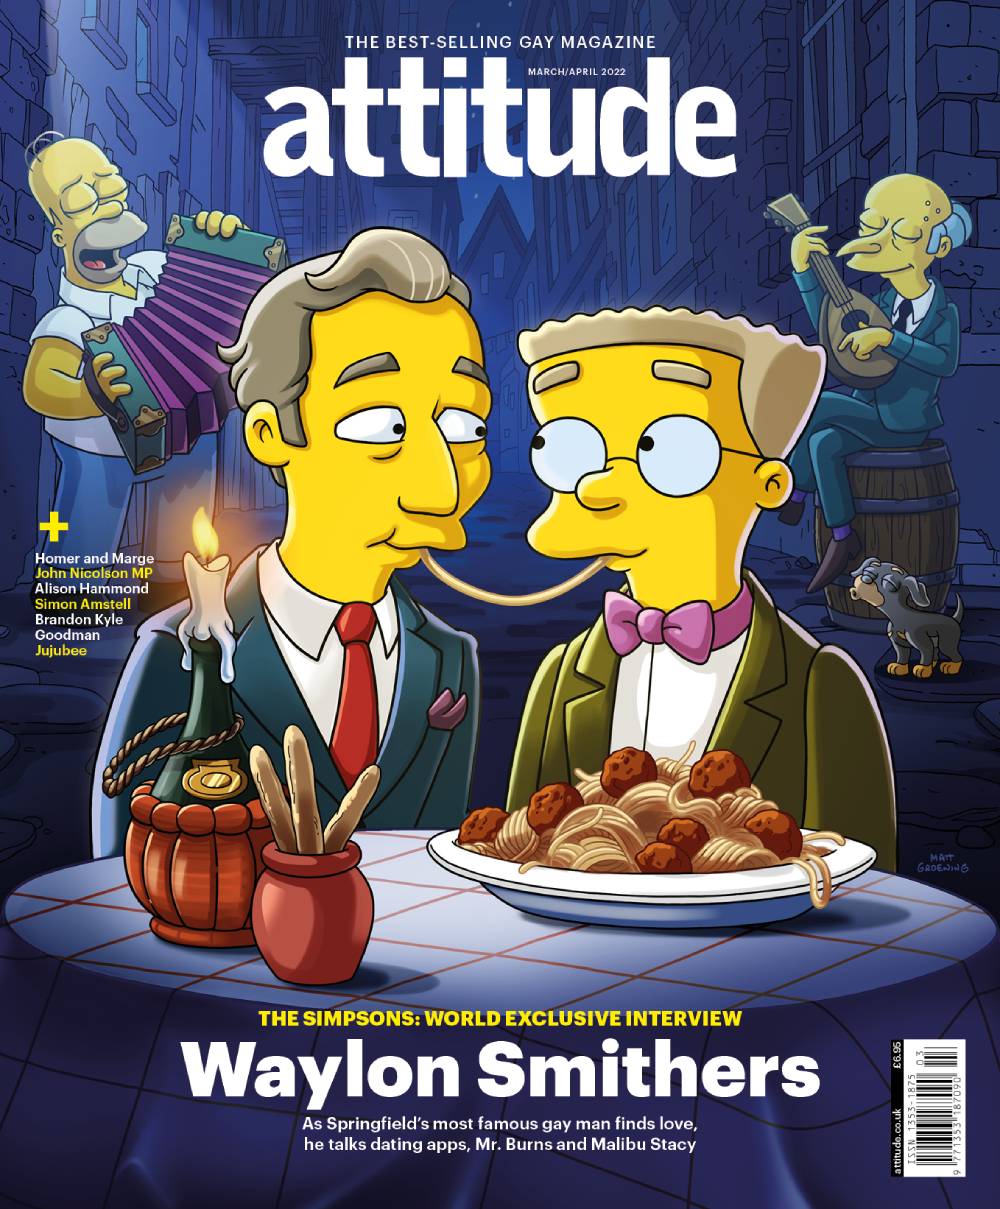 The Simpsons character Waylon Smith and his boyfriend Michael de Graaf are featured on the cover of Attitude